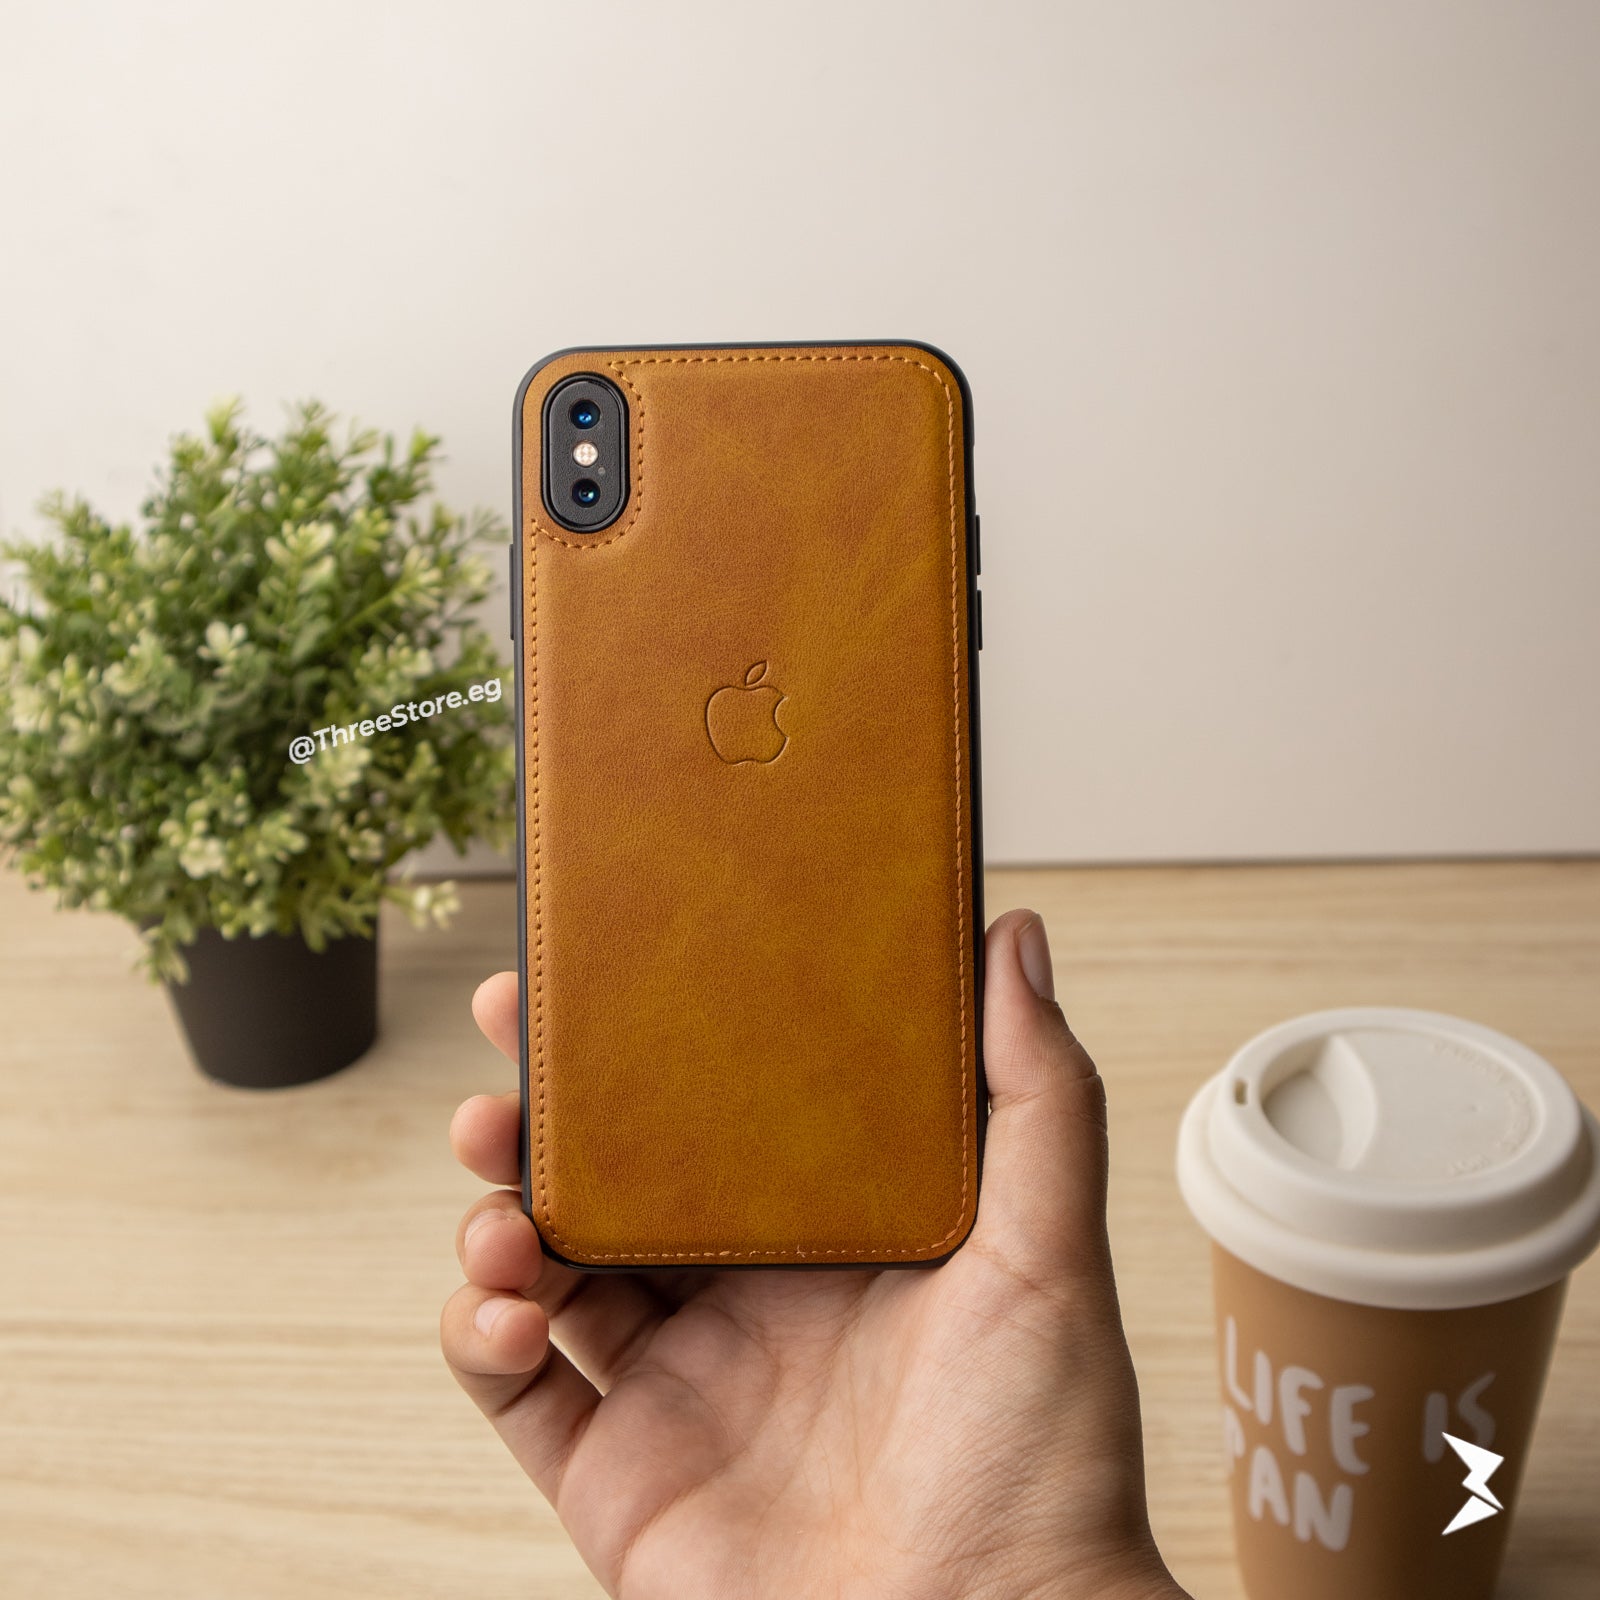 Cradle Leather Case iPhone XR Three store